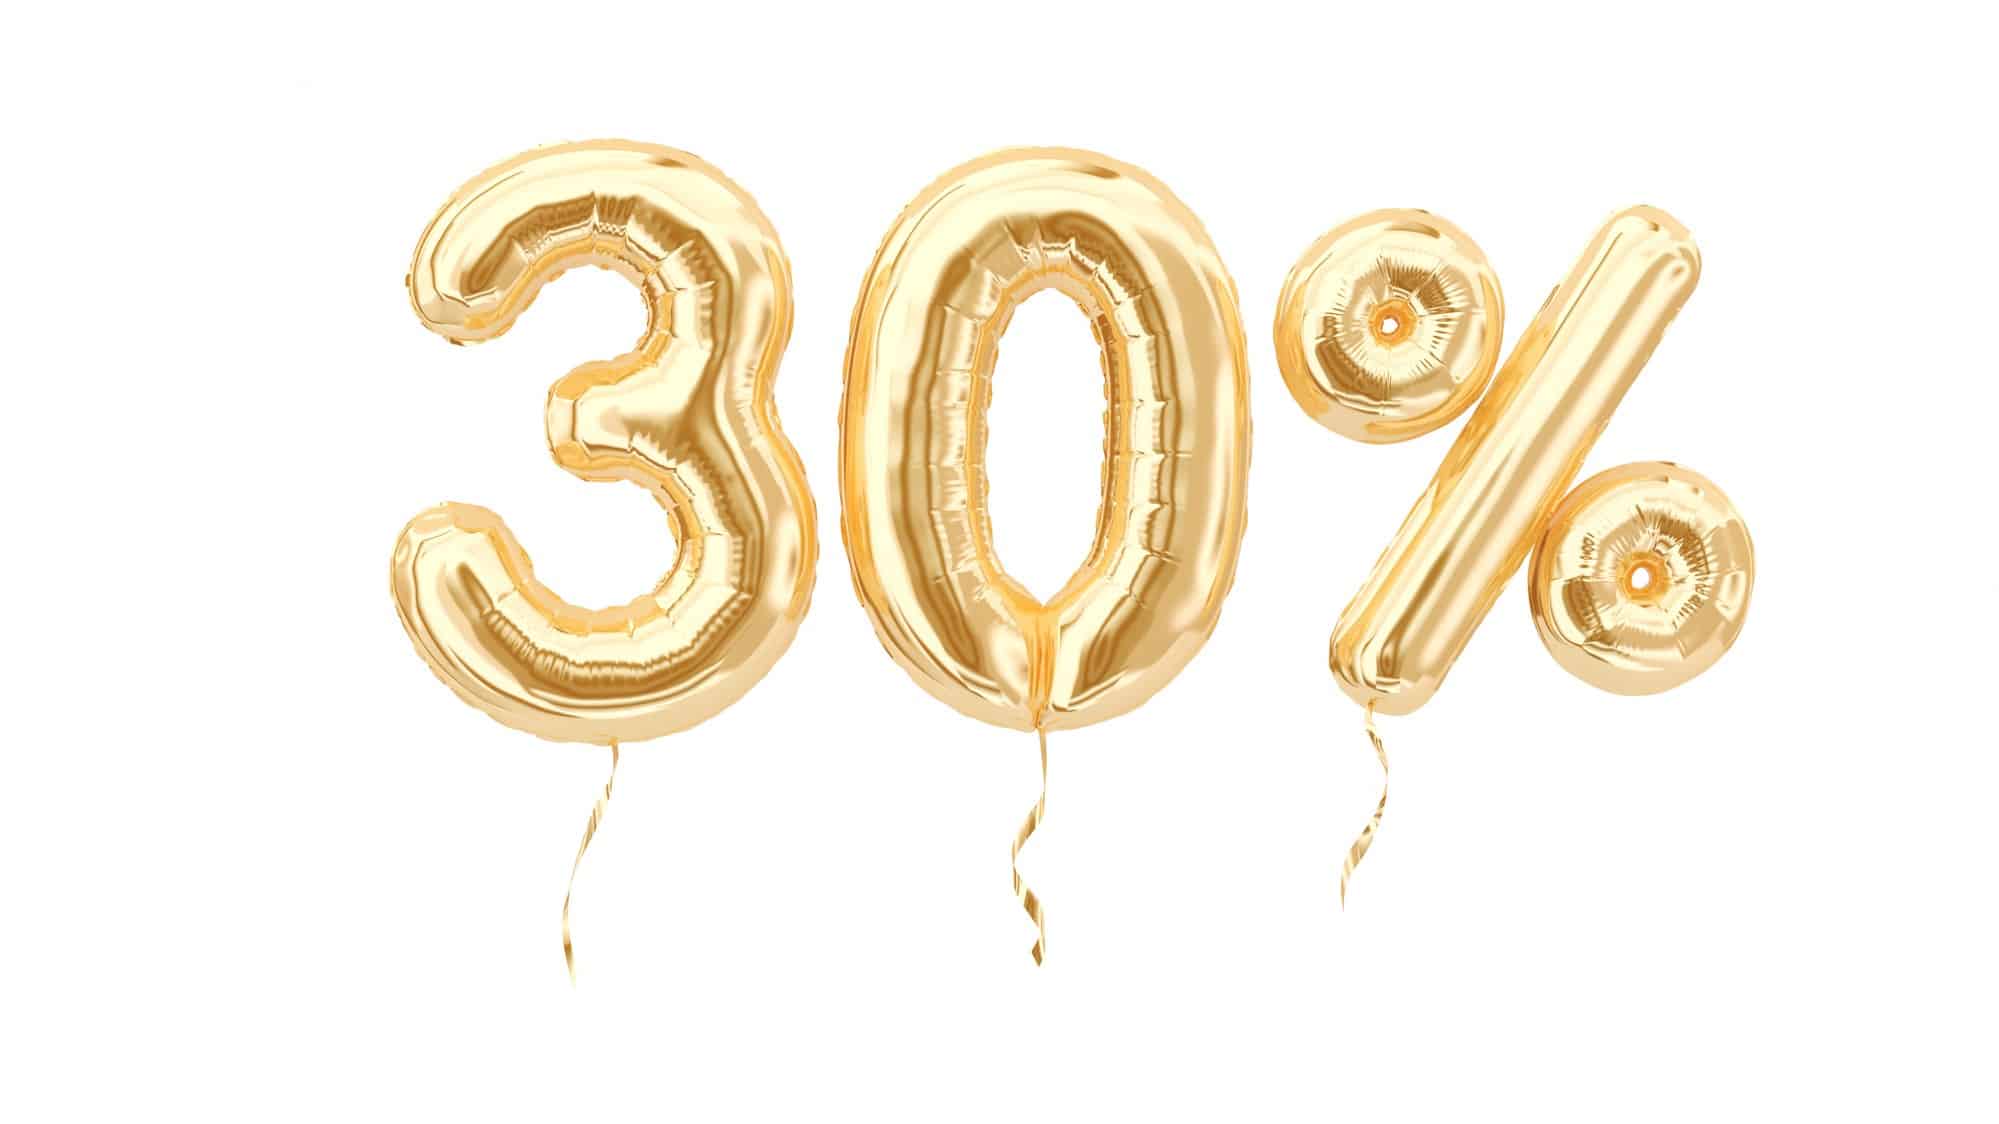 discount asx shares represented by gold baloons in the form of thirty per cent.